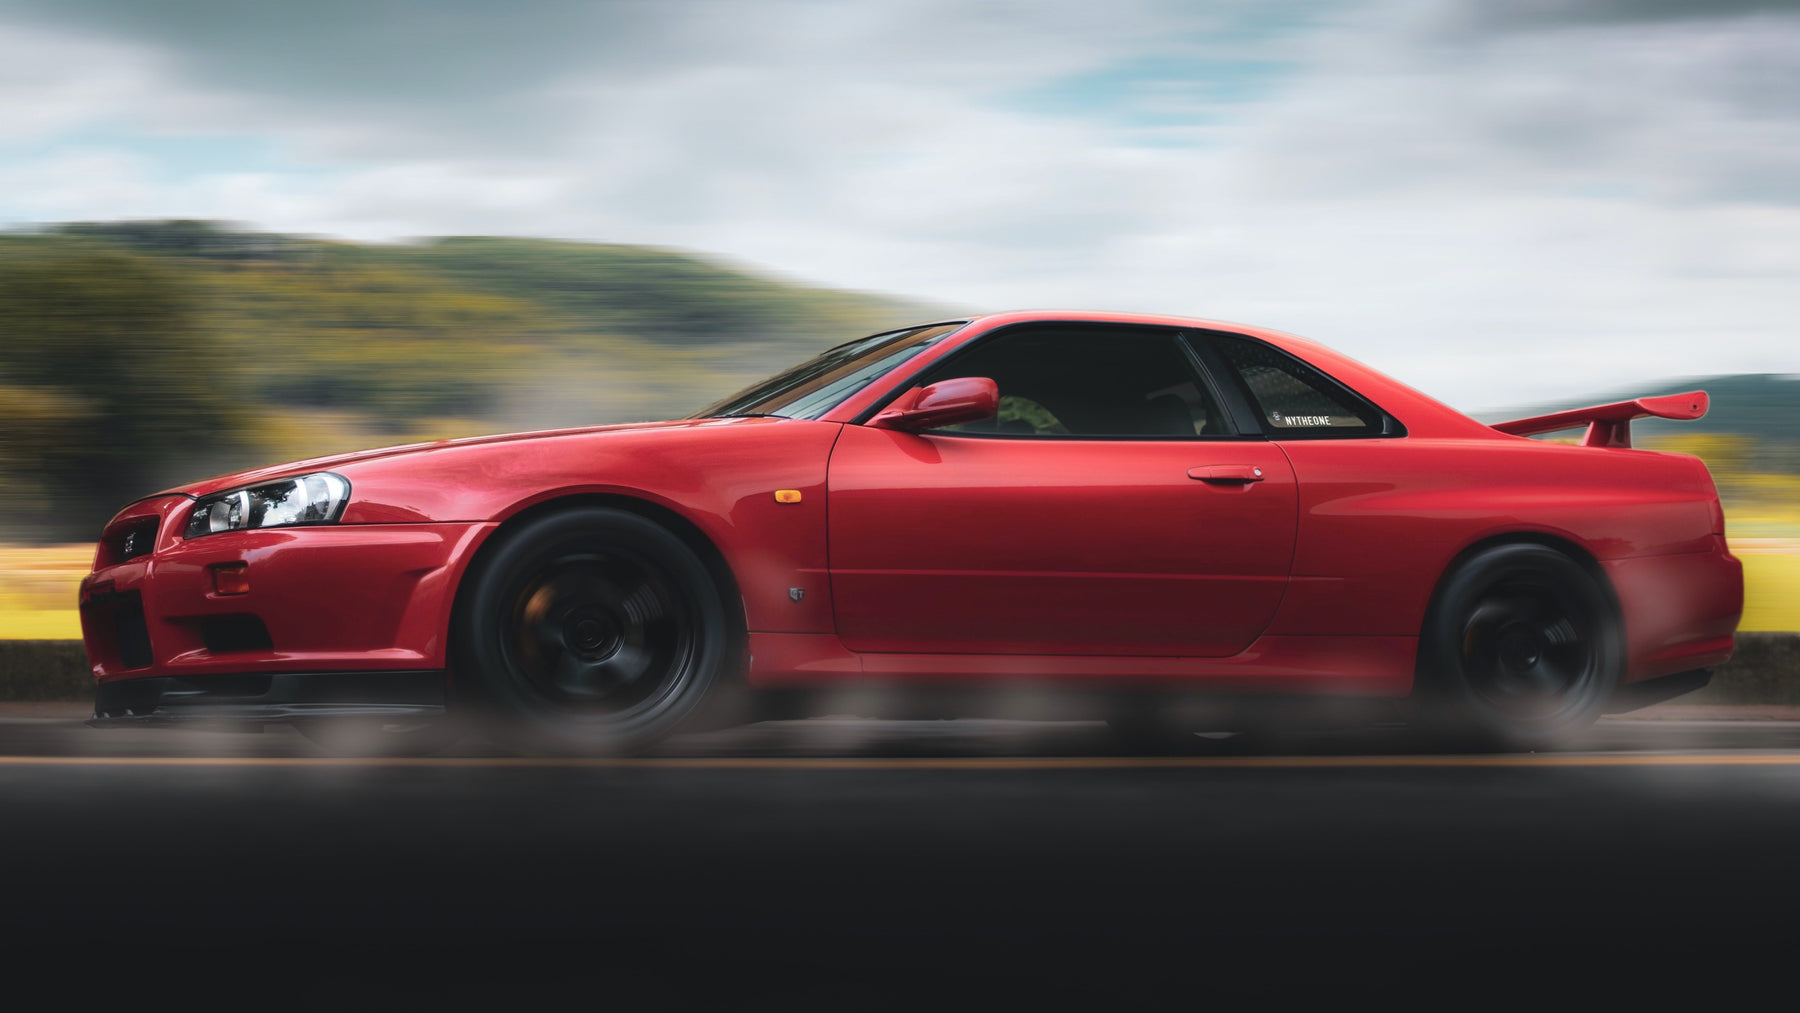 Custom Car Wheels and Performance: How They Can Improve Handling and Acceleration